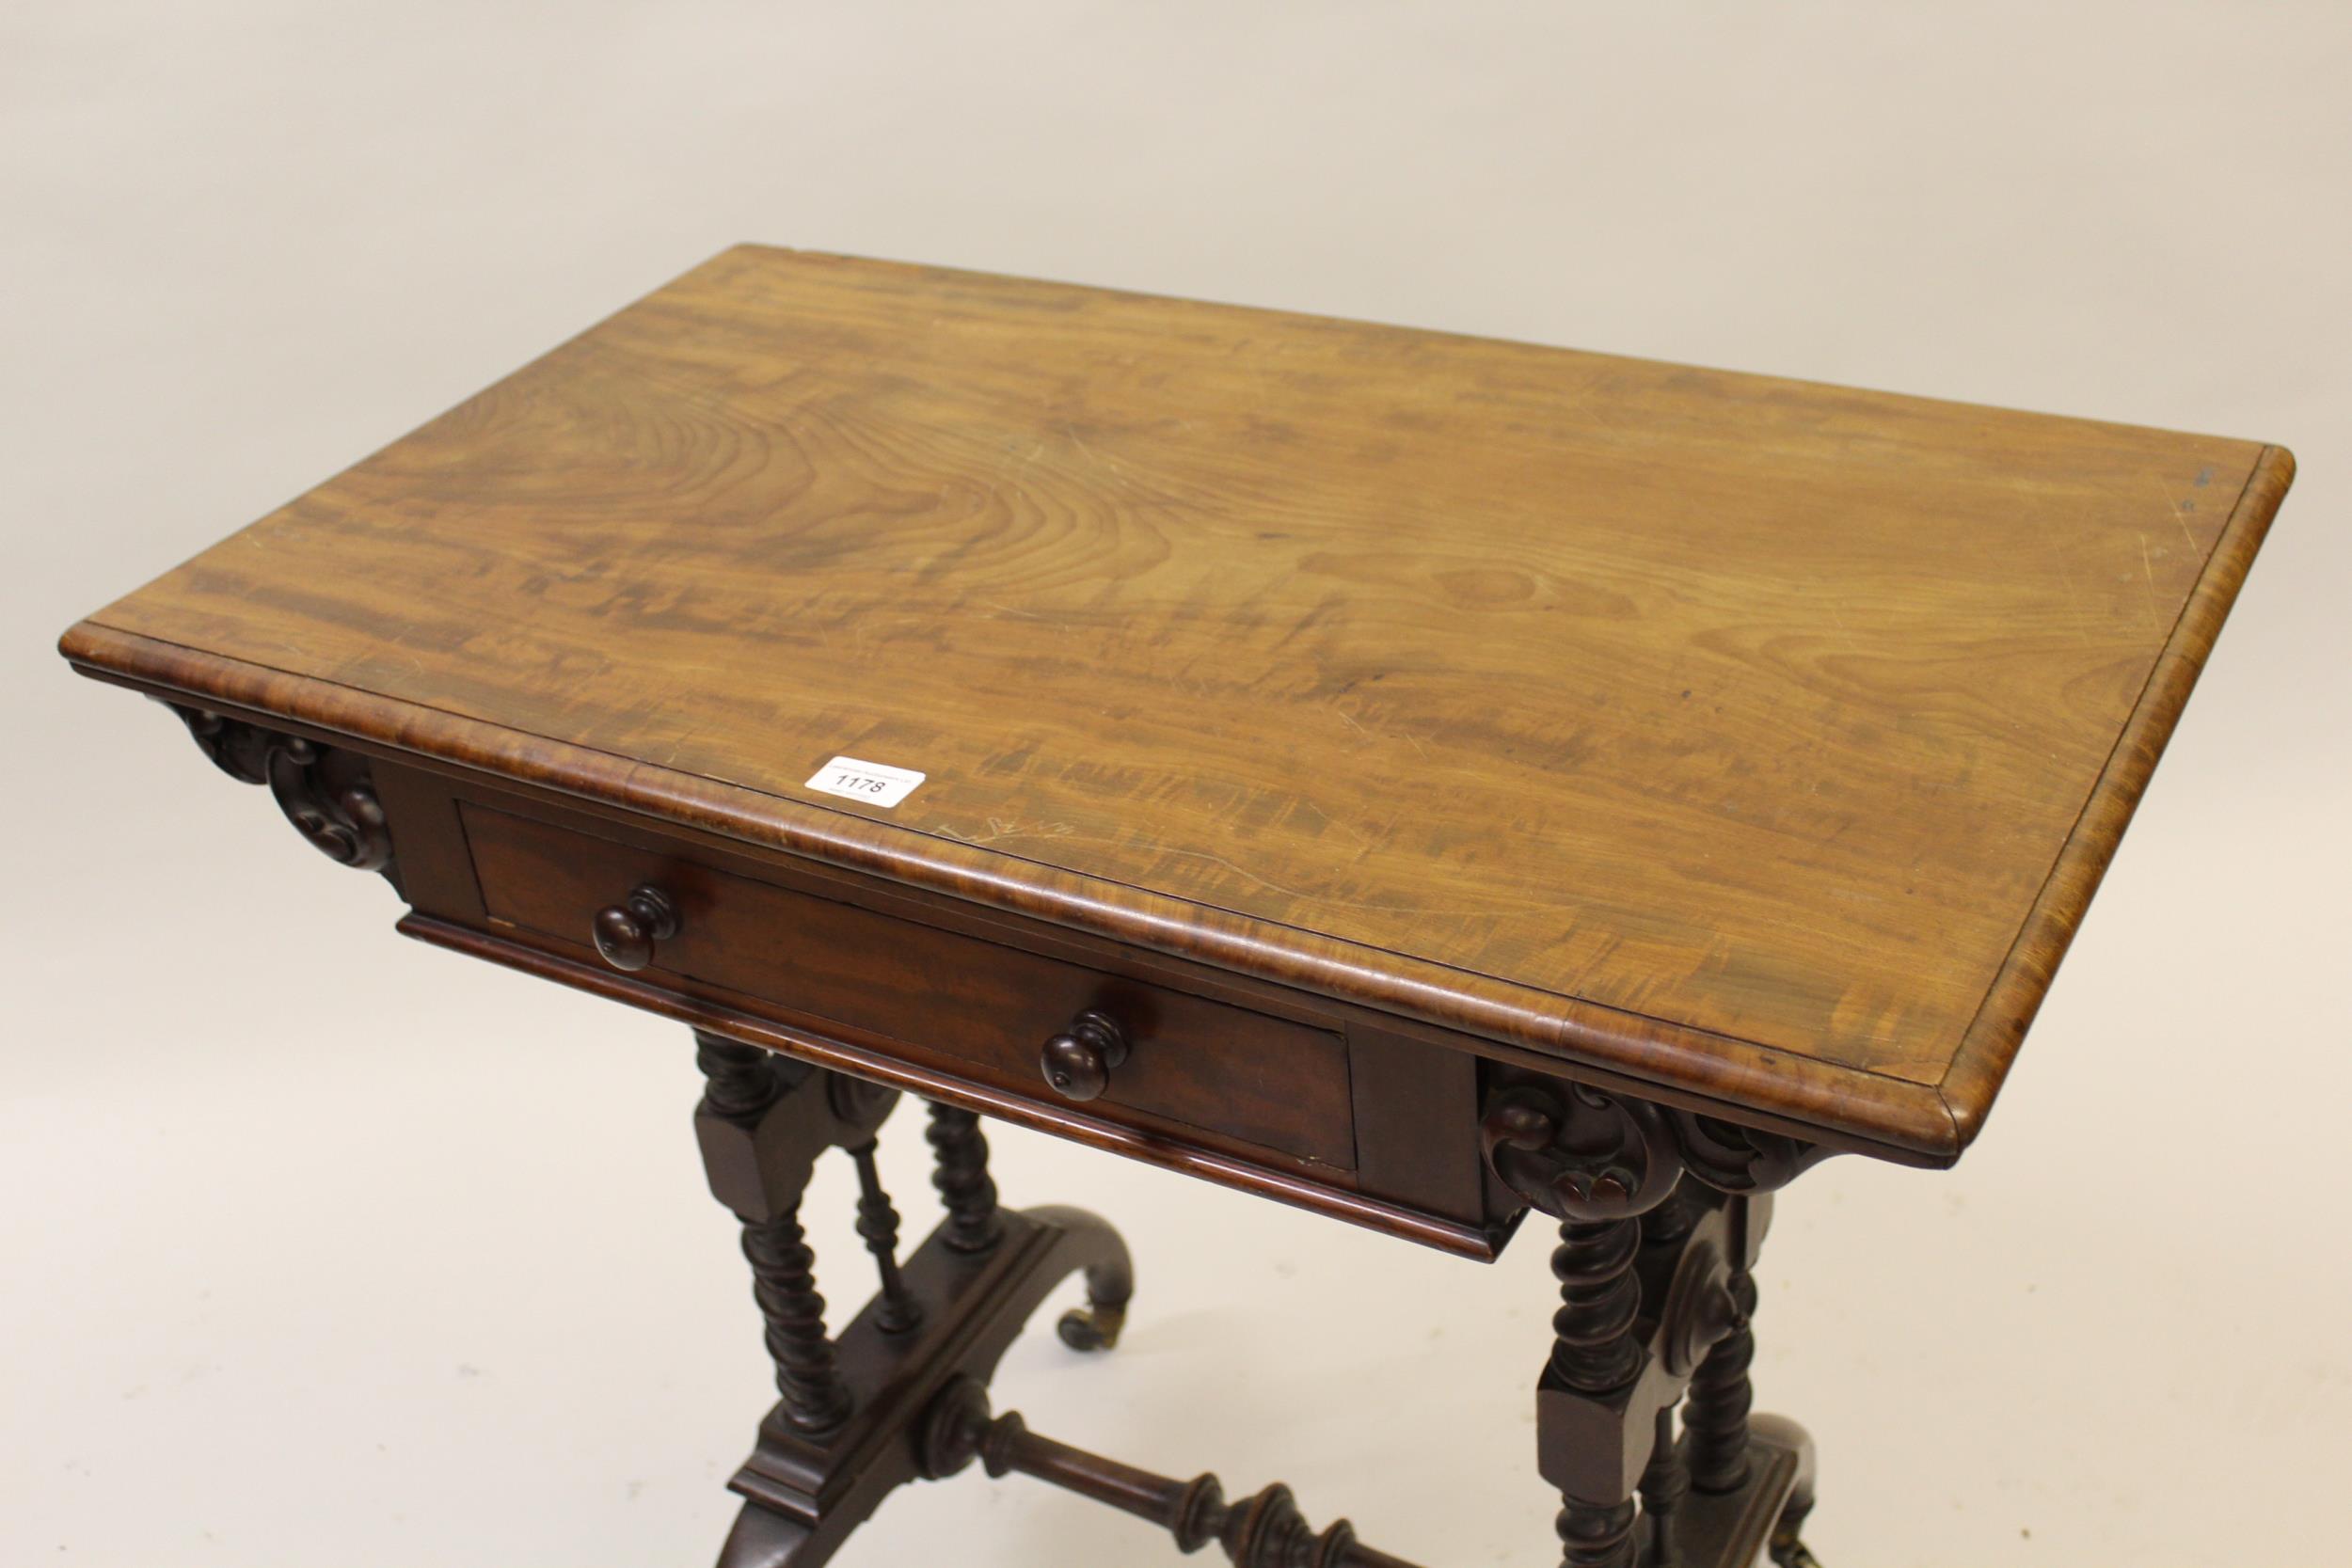 Good quality Victorian figured mahogany rectangular fold-over card table by Lamb of Manchester, - Image 2 of 3